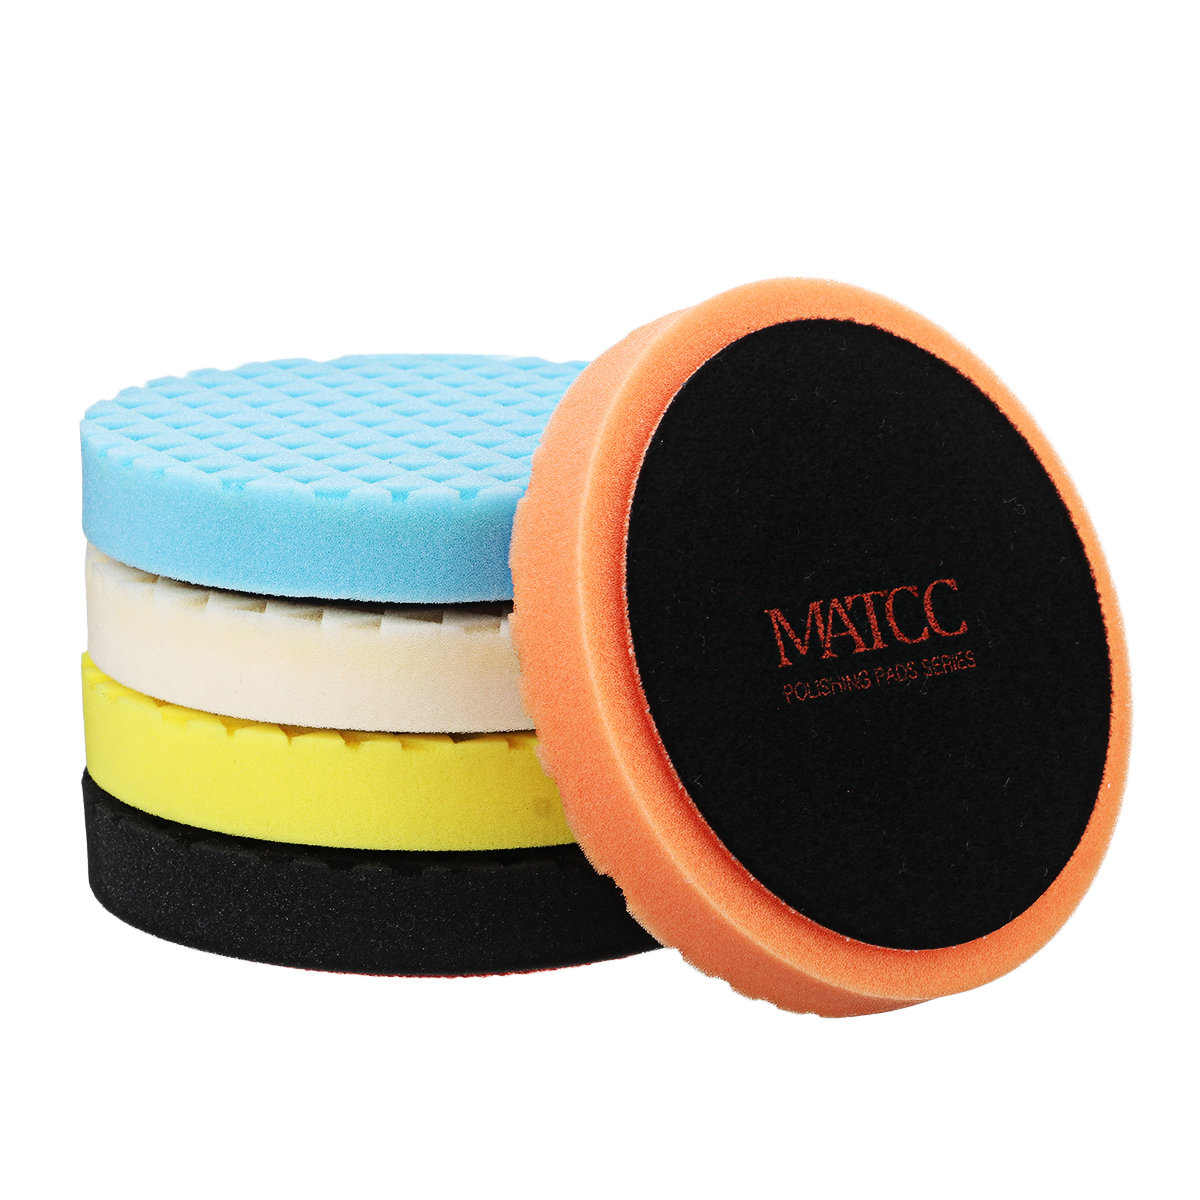 MATCC-8Pcs-6-Inch-Car-Polishing-Pad-Kit-M14-Buffing-Pads-with-Wool-Bonnet-Pads-for-Car-Polisher-and--1878198-8